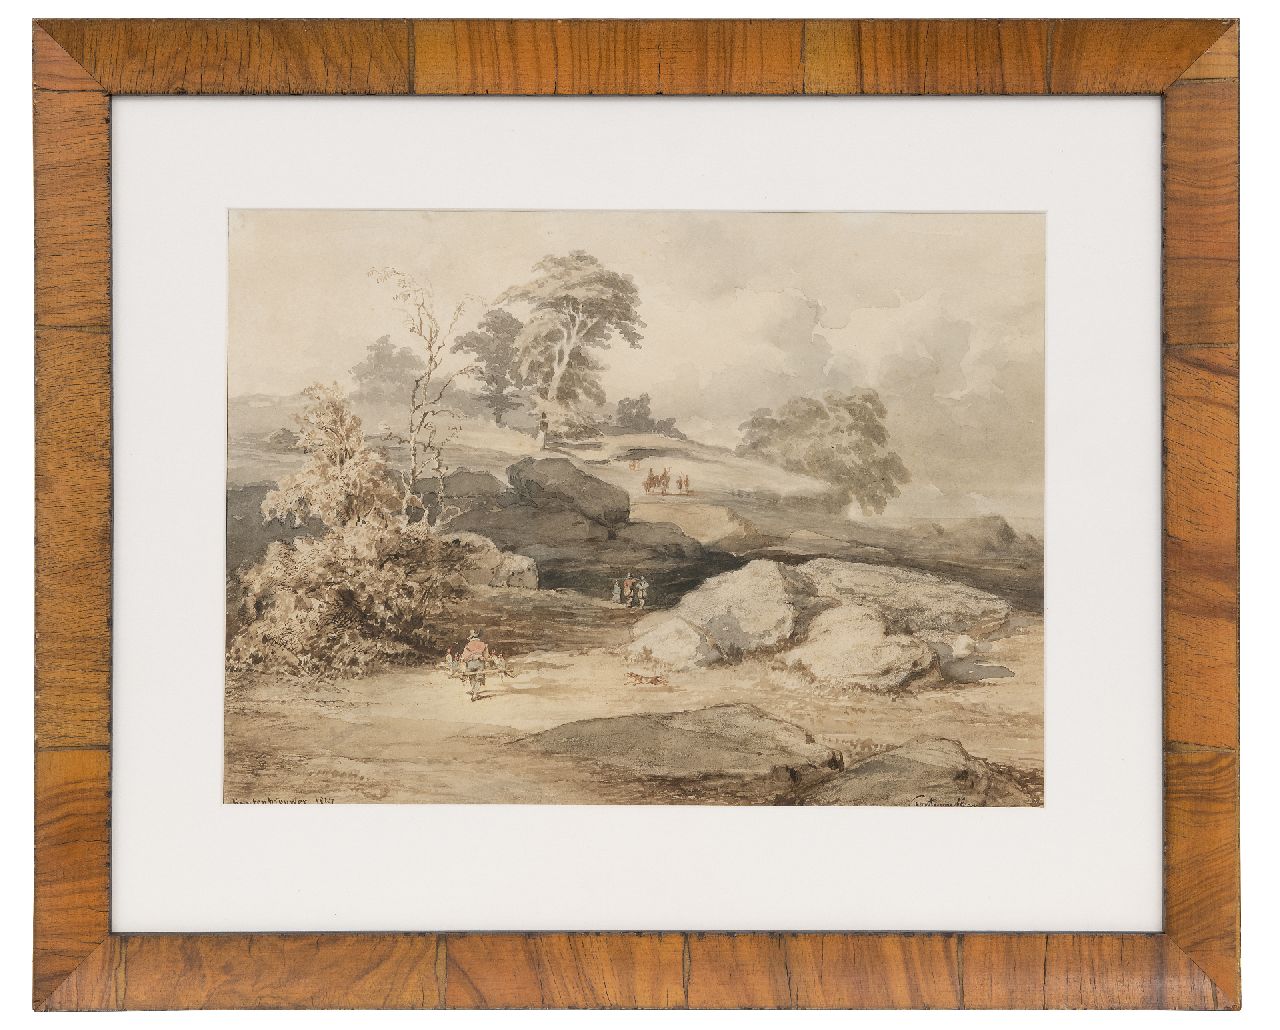 Kuytenbrouwer II M.A.  | Martinus Antonius Kuytenbrouwer II | Watercolours and drawings offered for sale | Falconry near Cuvier Chantillon in the forest of Fontainebleau, brown ink, black chalk and watercolour on paper 24.6 x 34.0 cm, signed l.l. and dated 1847